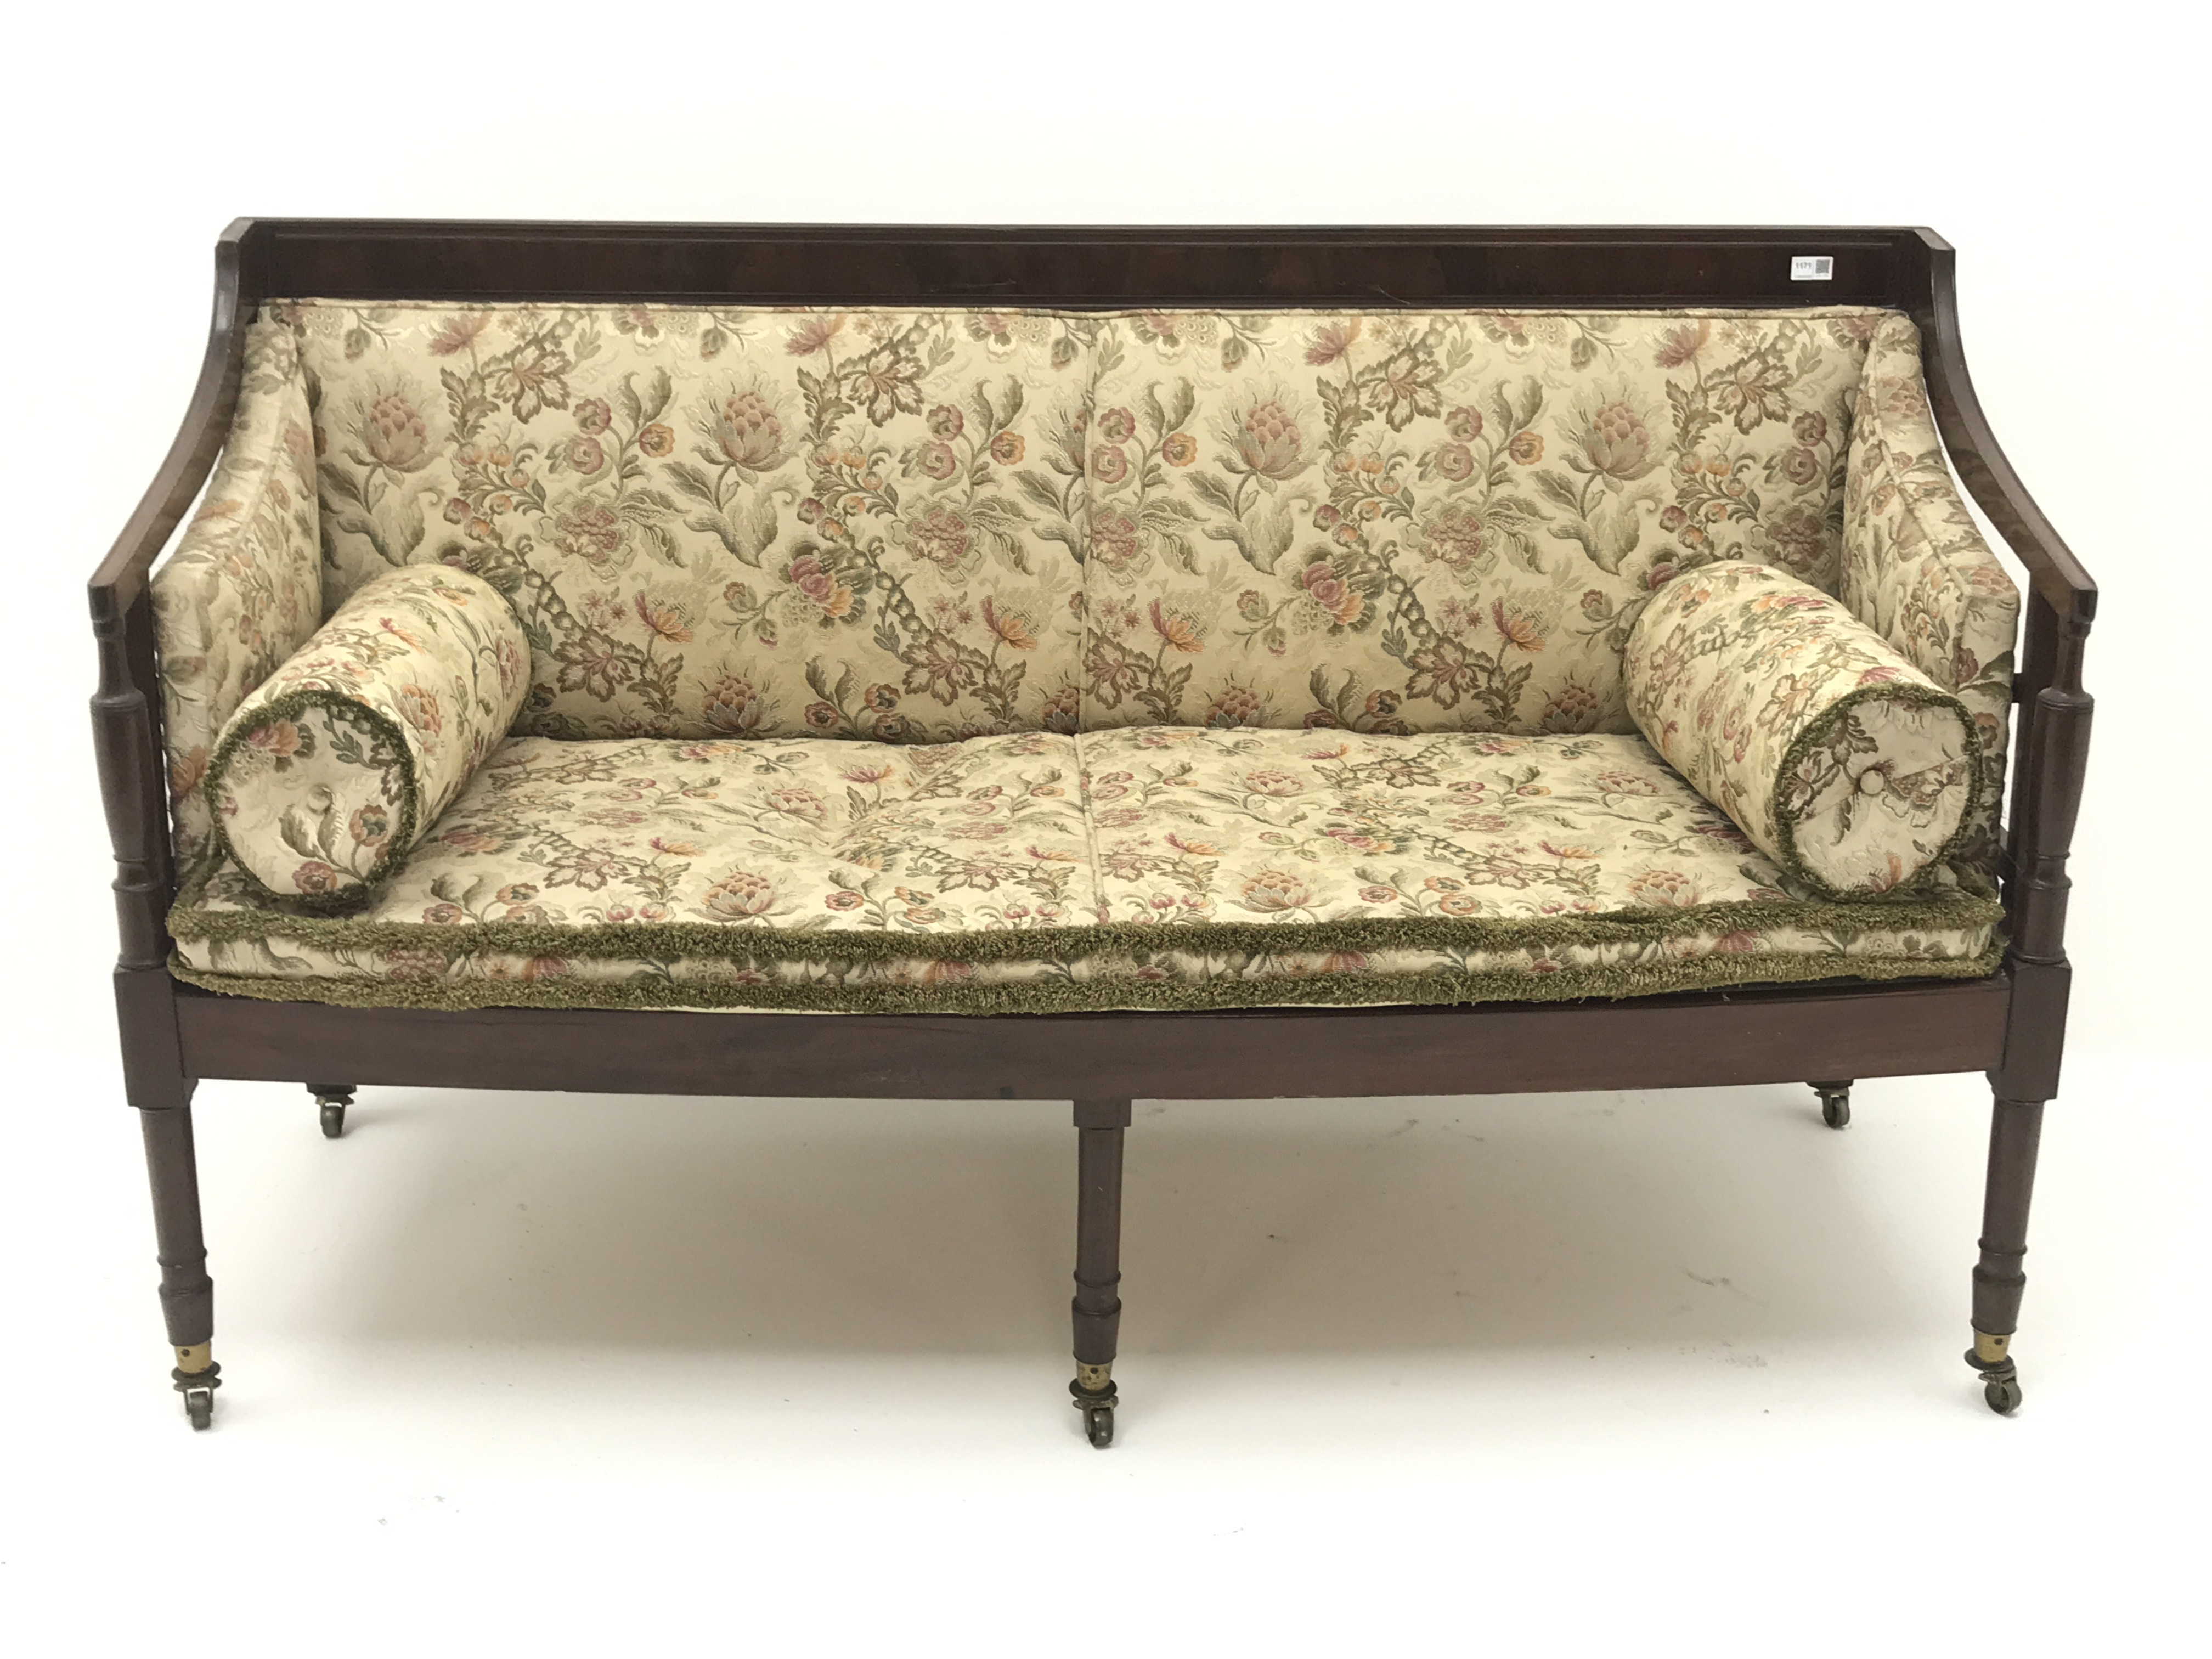 Regency mahogany framed settee, upholstered in a beige ground floral patterned fabric, - Image 2 of 4